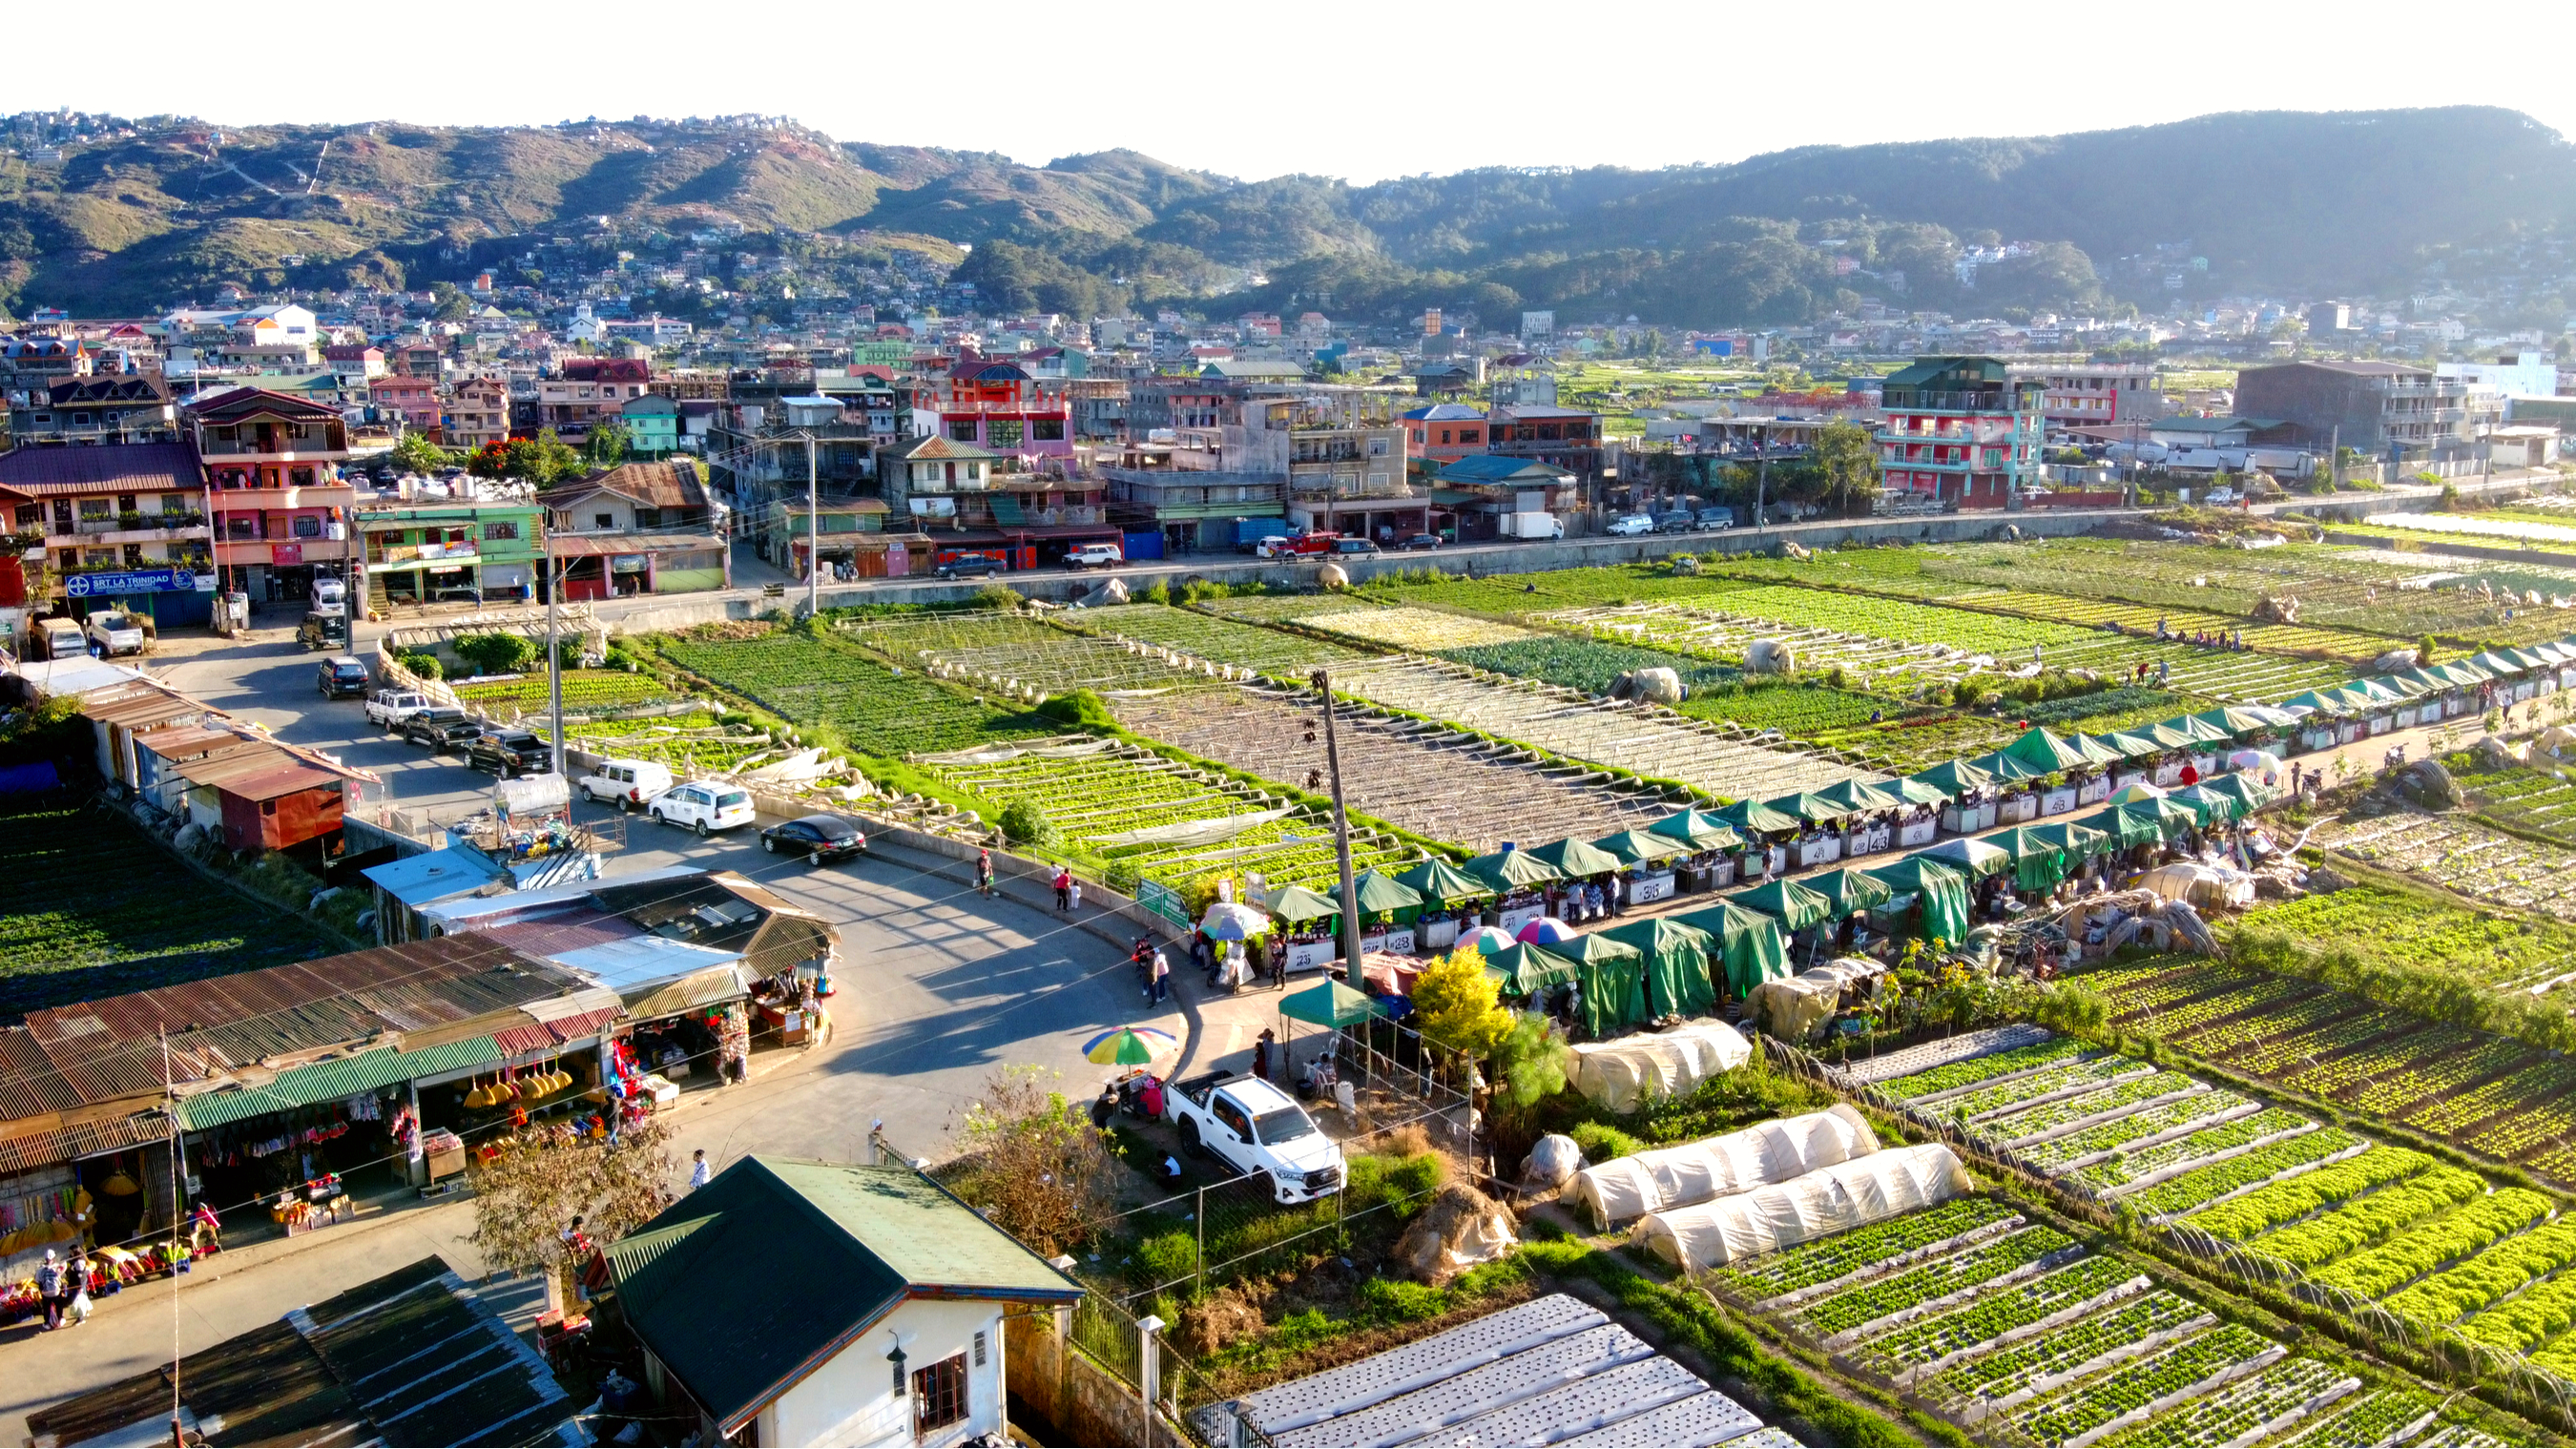 Aerial view of a strawberry farm in Benguet